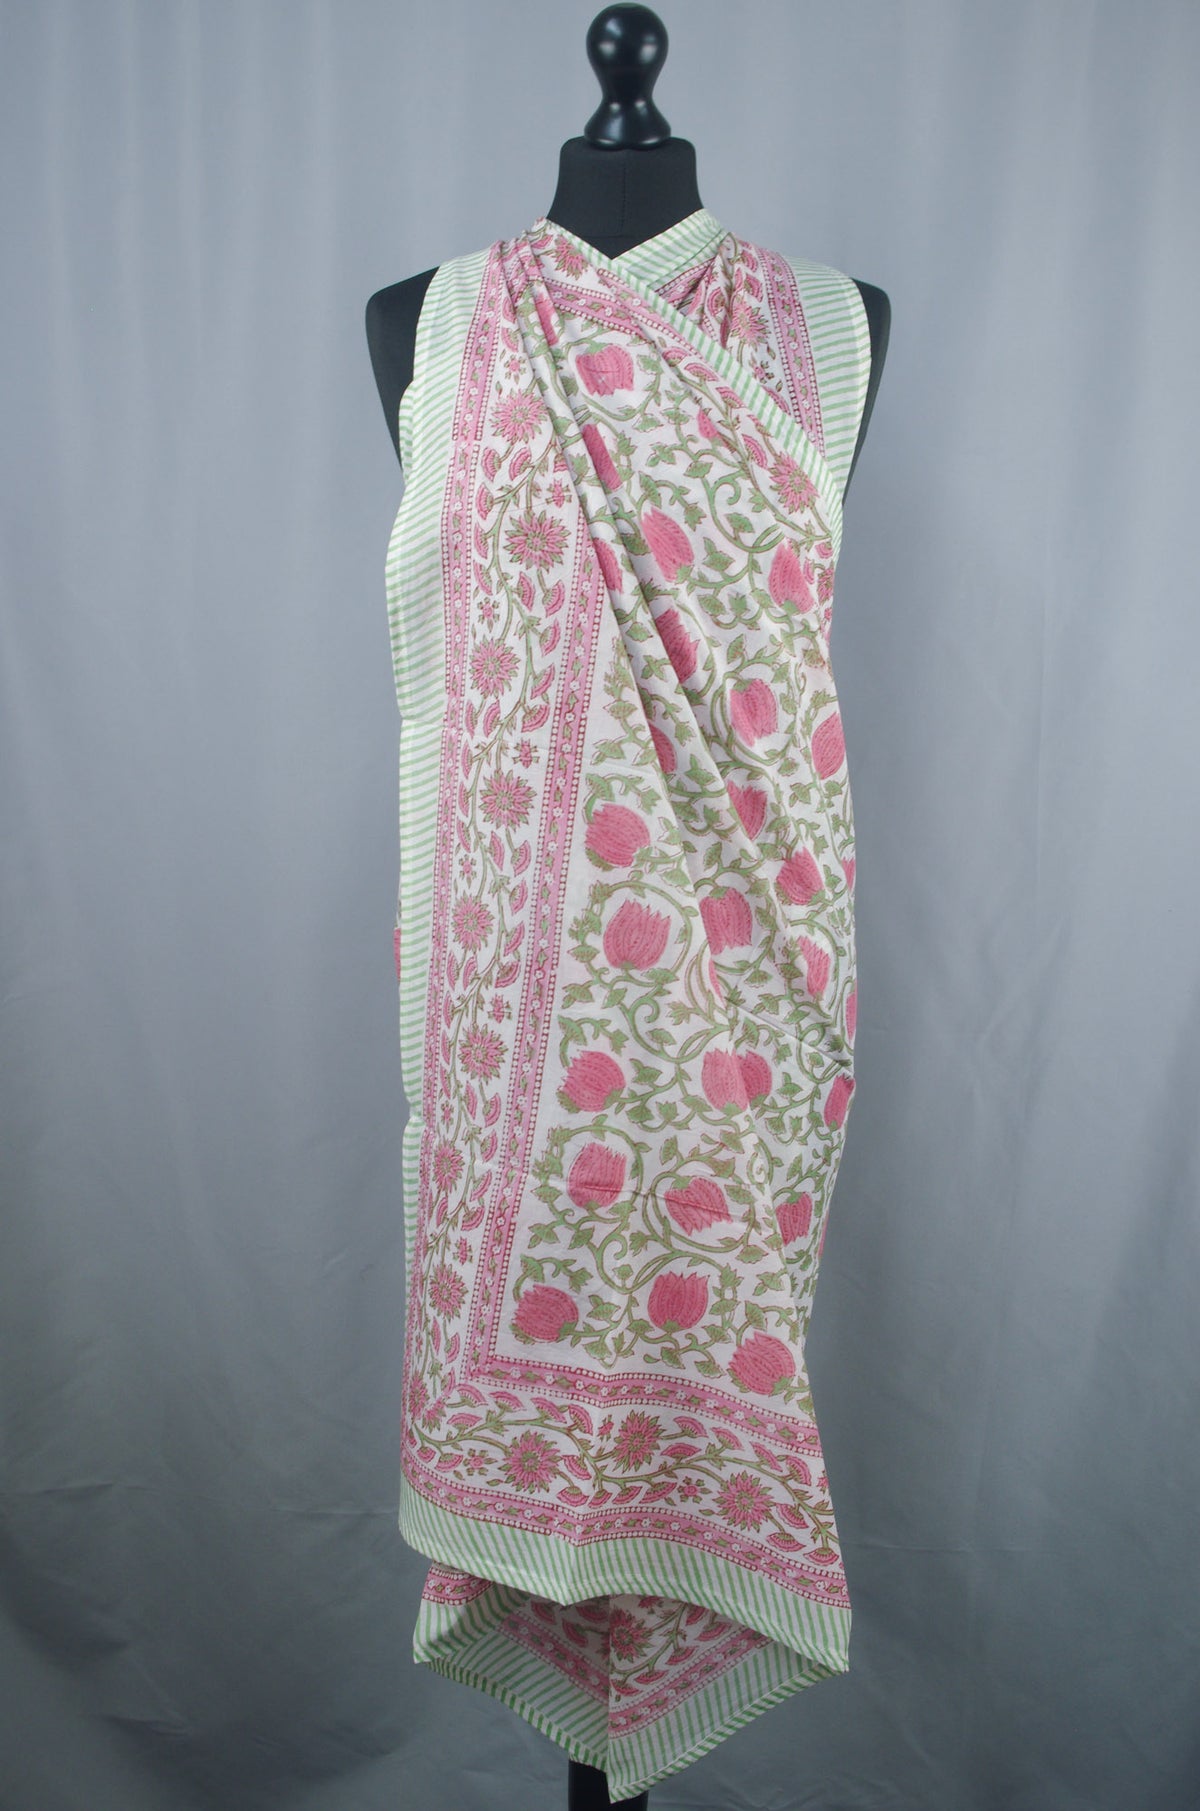 Beach Coverup Sarong Pareo - Pink Bells On Cream Base